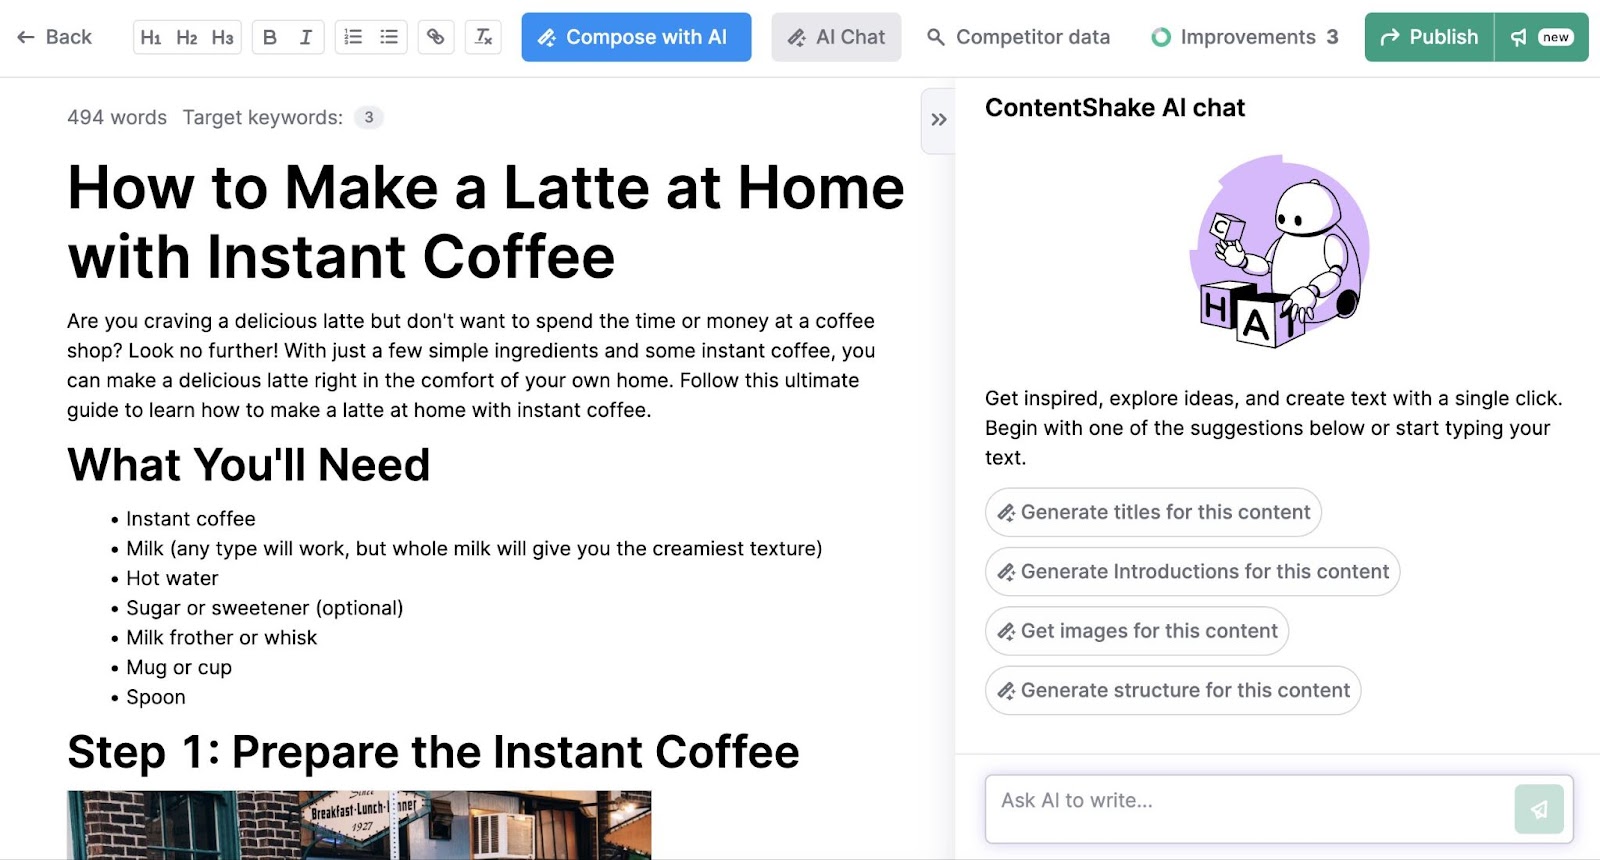 contentshake AI chat options for a blog about how to make a latte at home